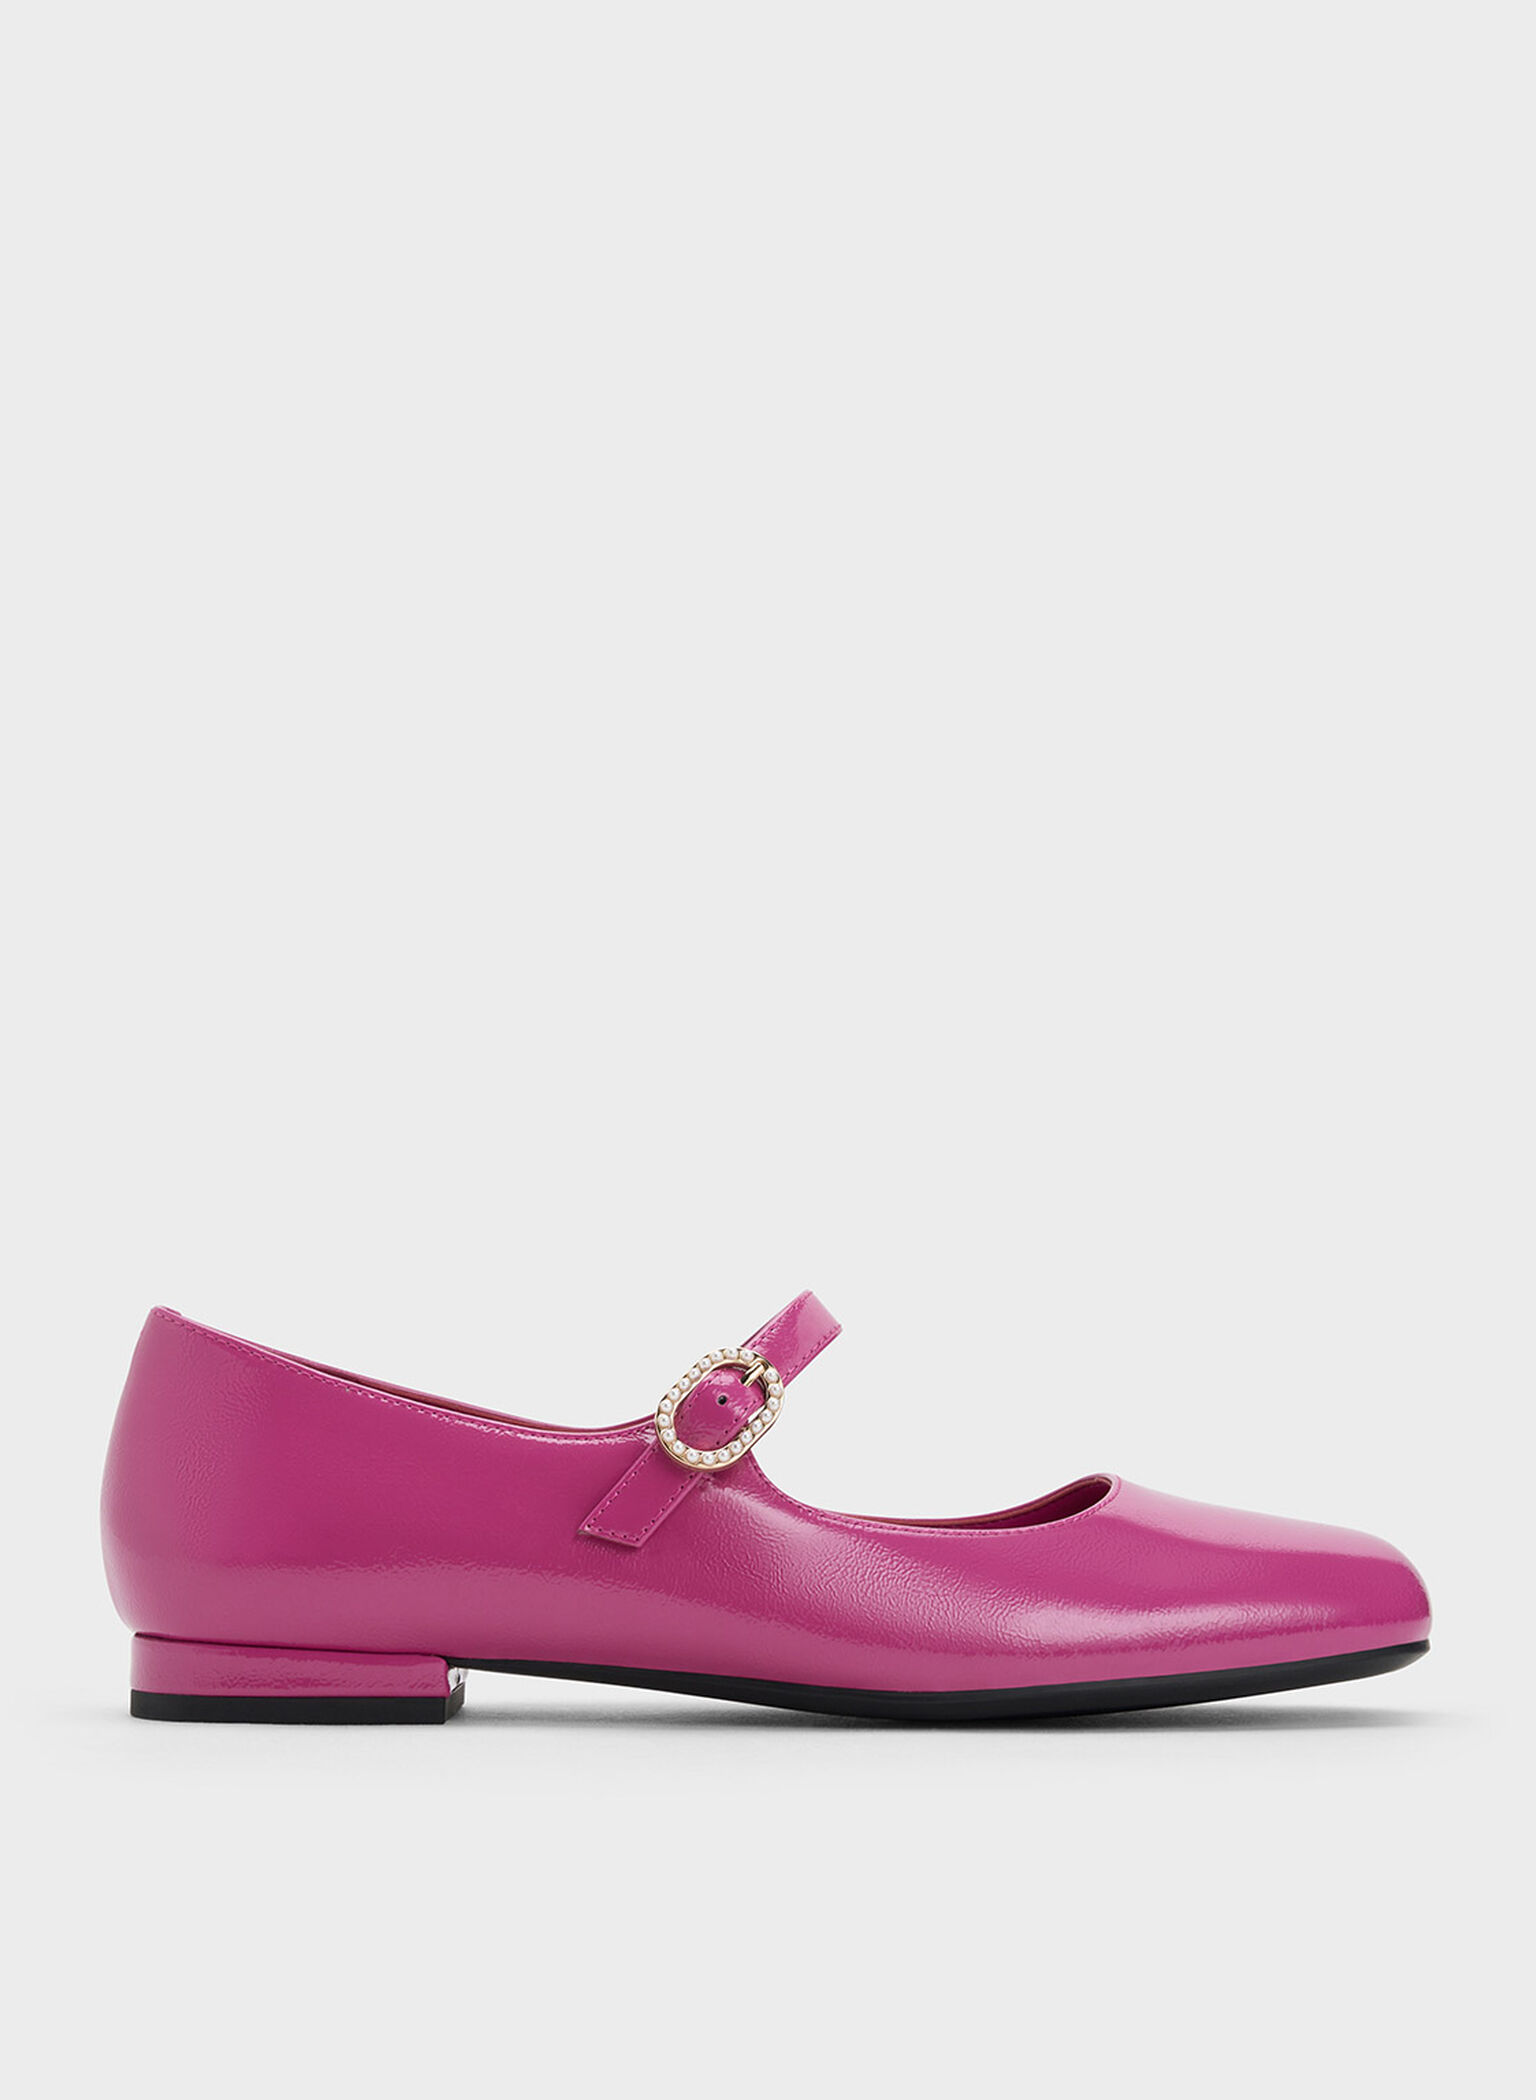 Patent Crinkle-Effect Pearl-Buckle Mary Janes, Fuchsia, hi-res